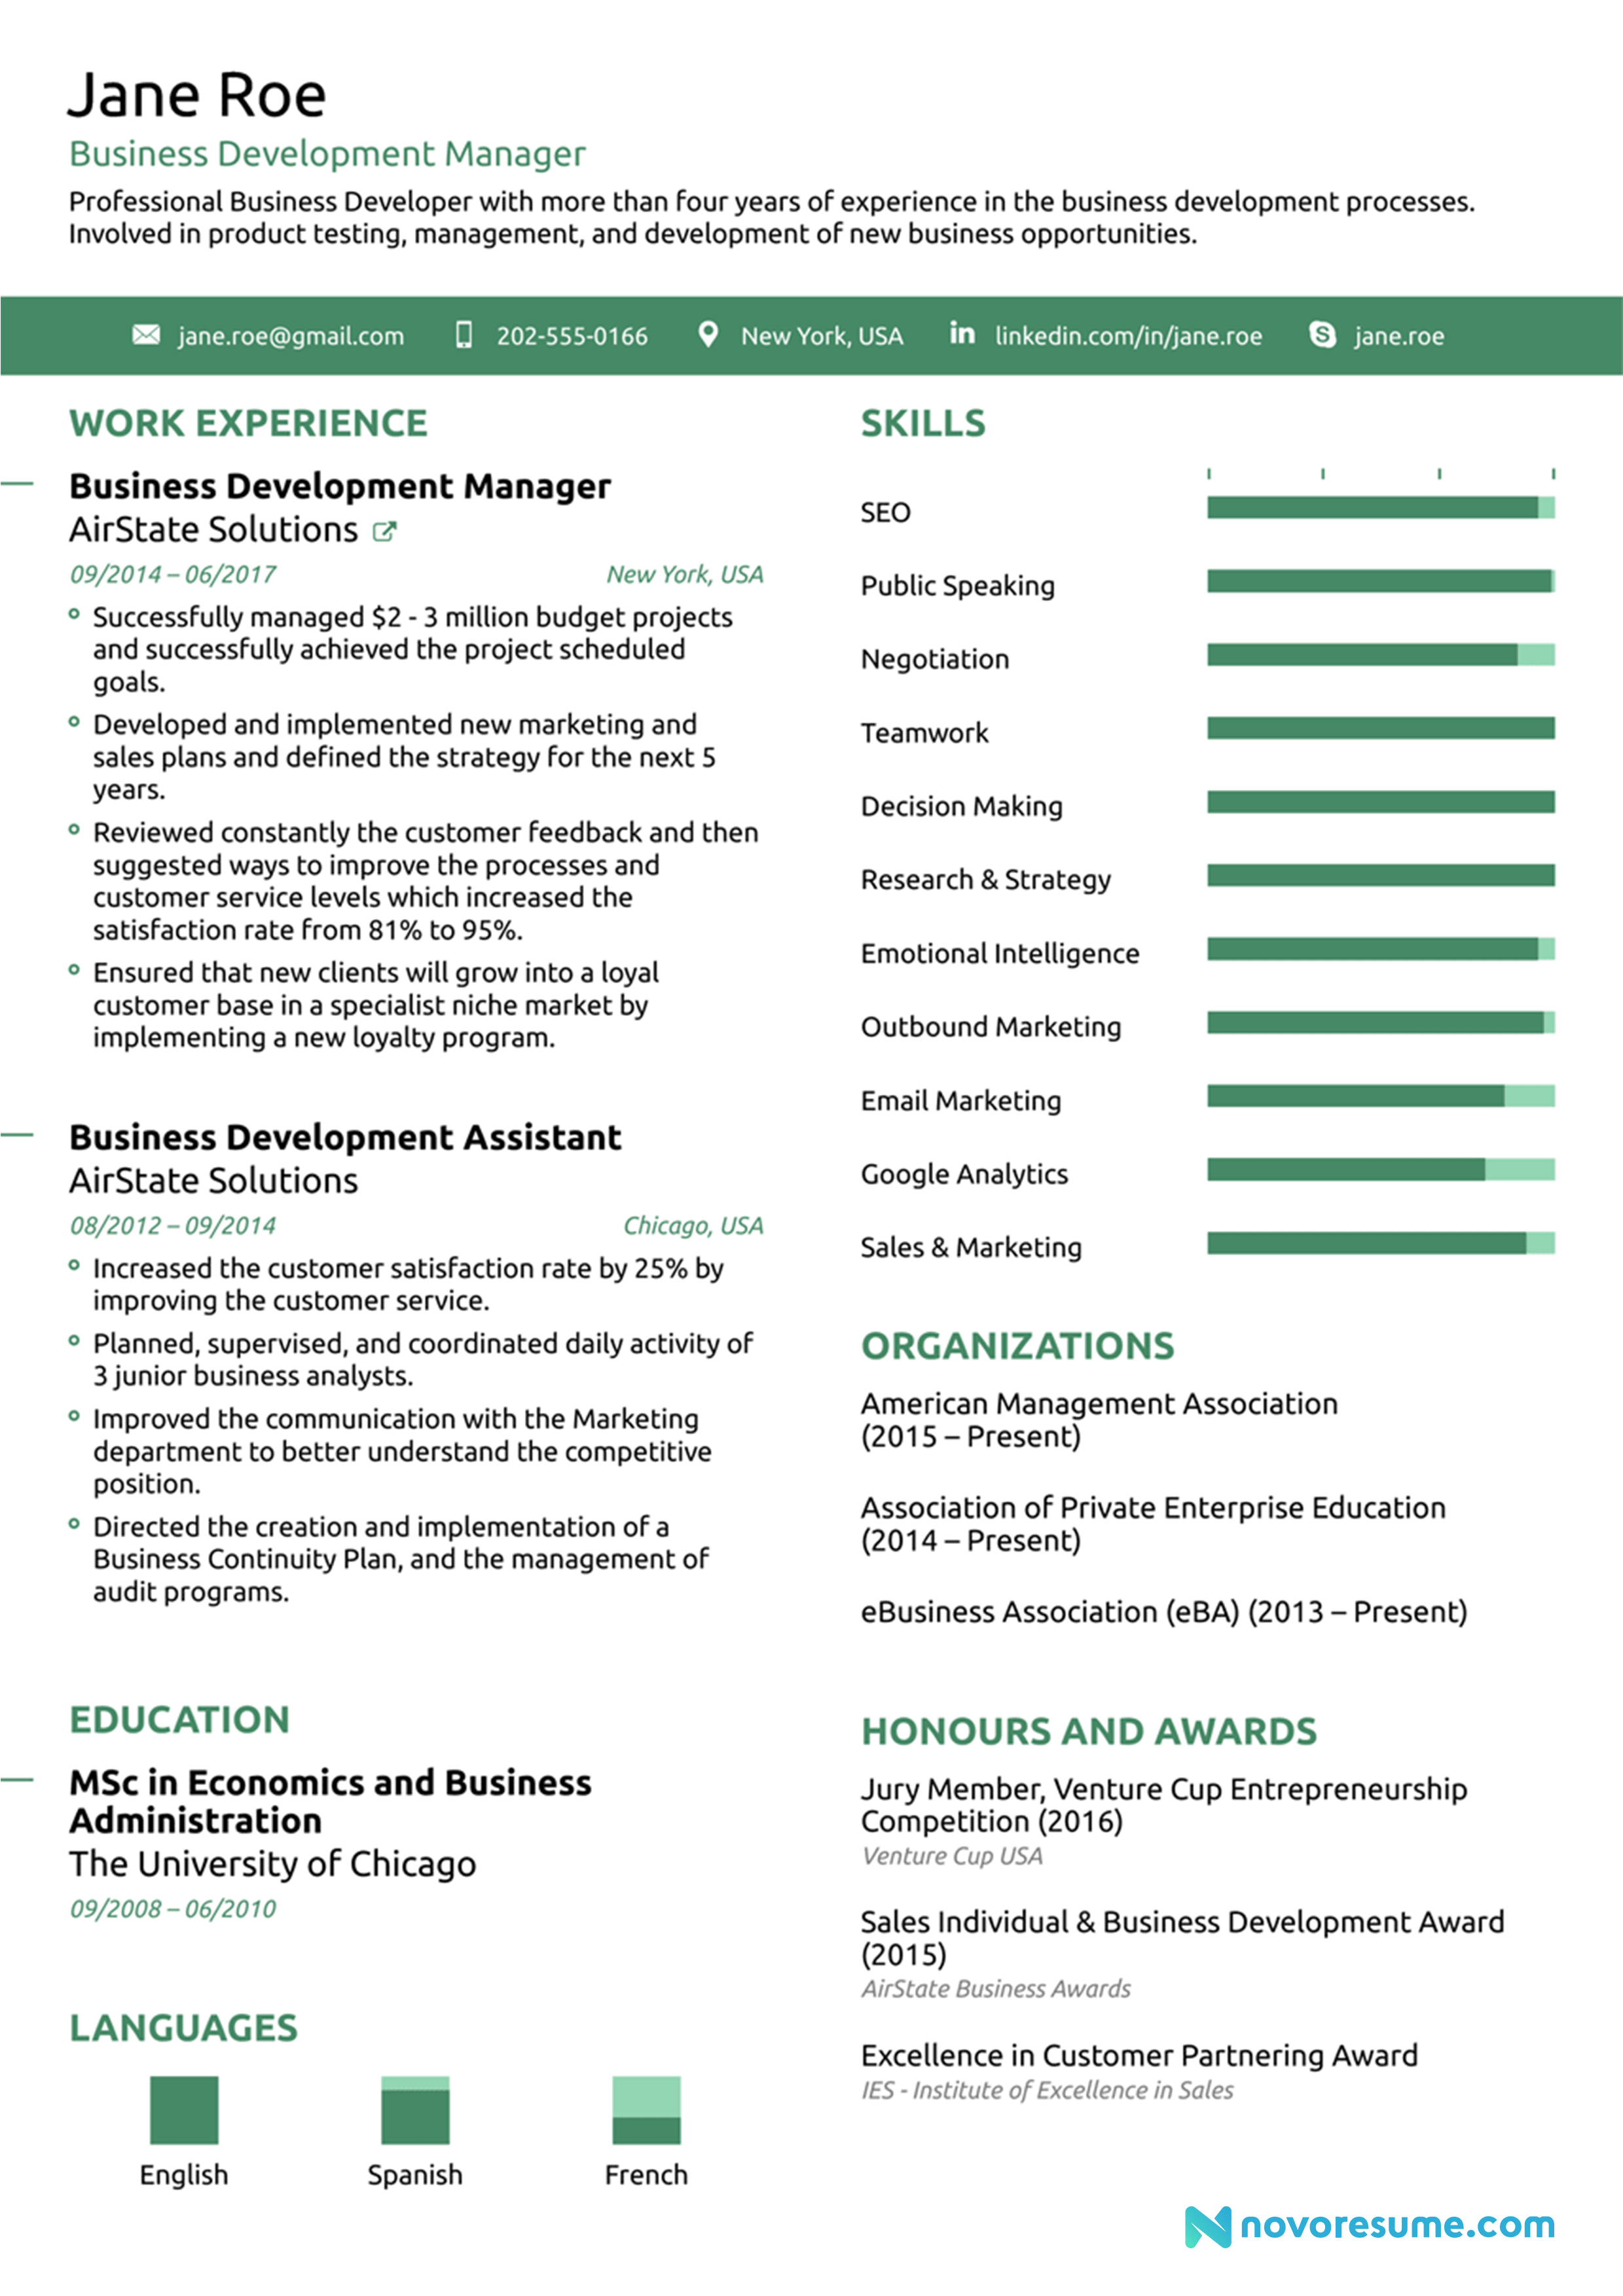 Best Resume Formats for 2020 [3+ Professional Templates]